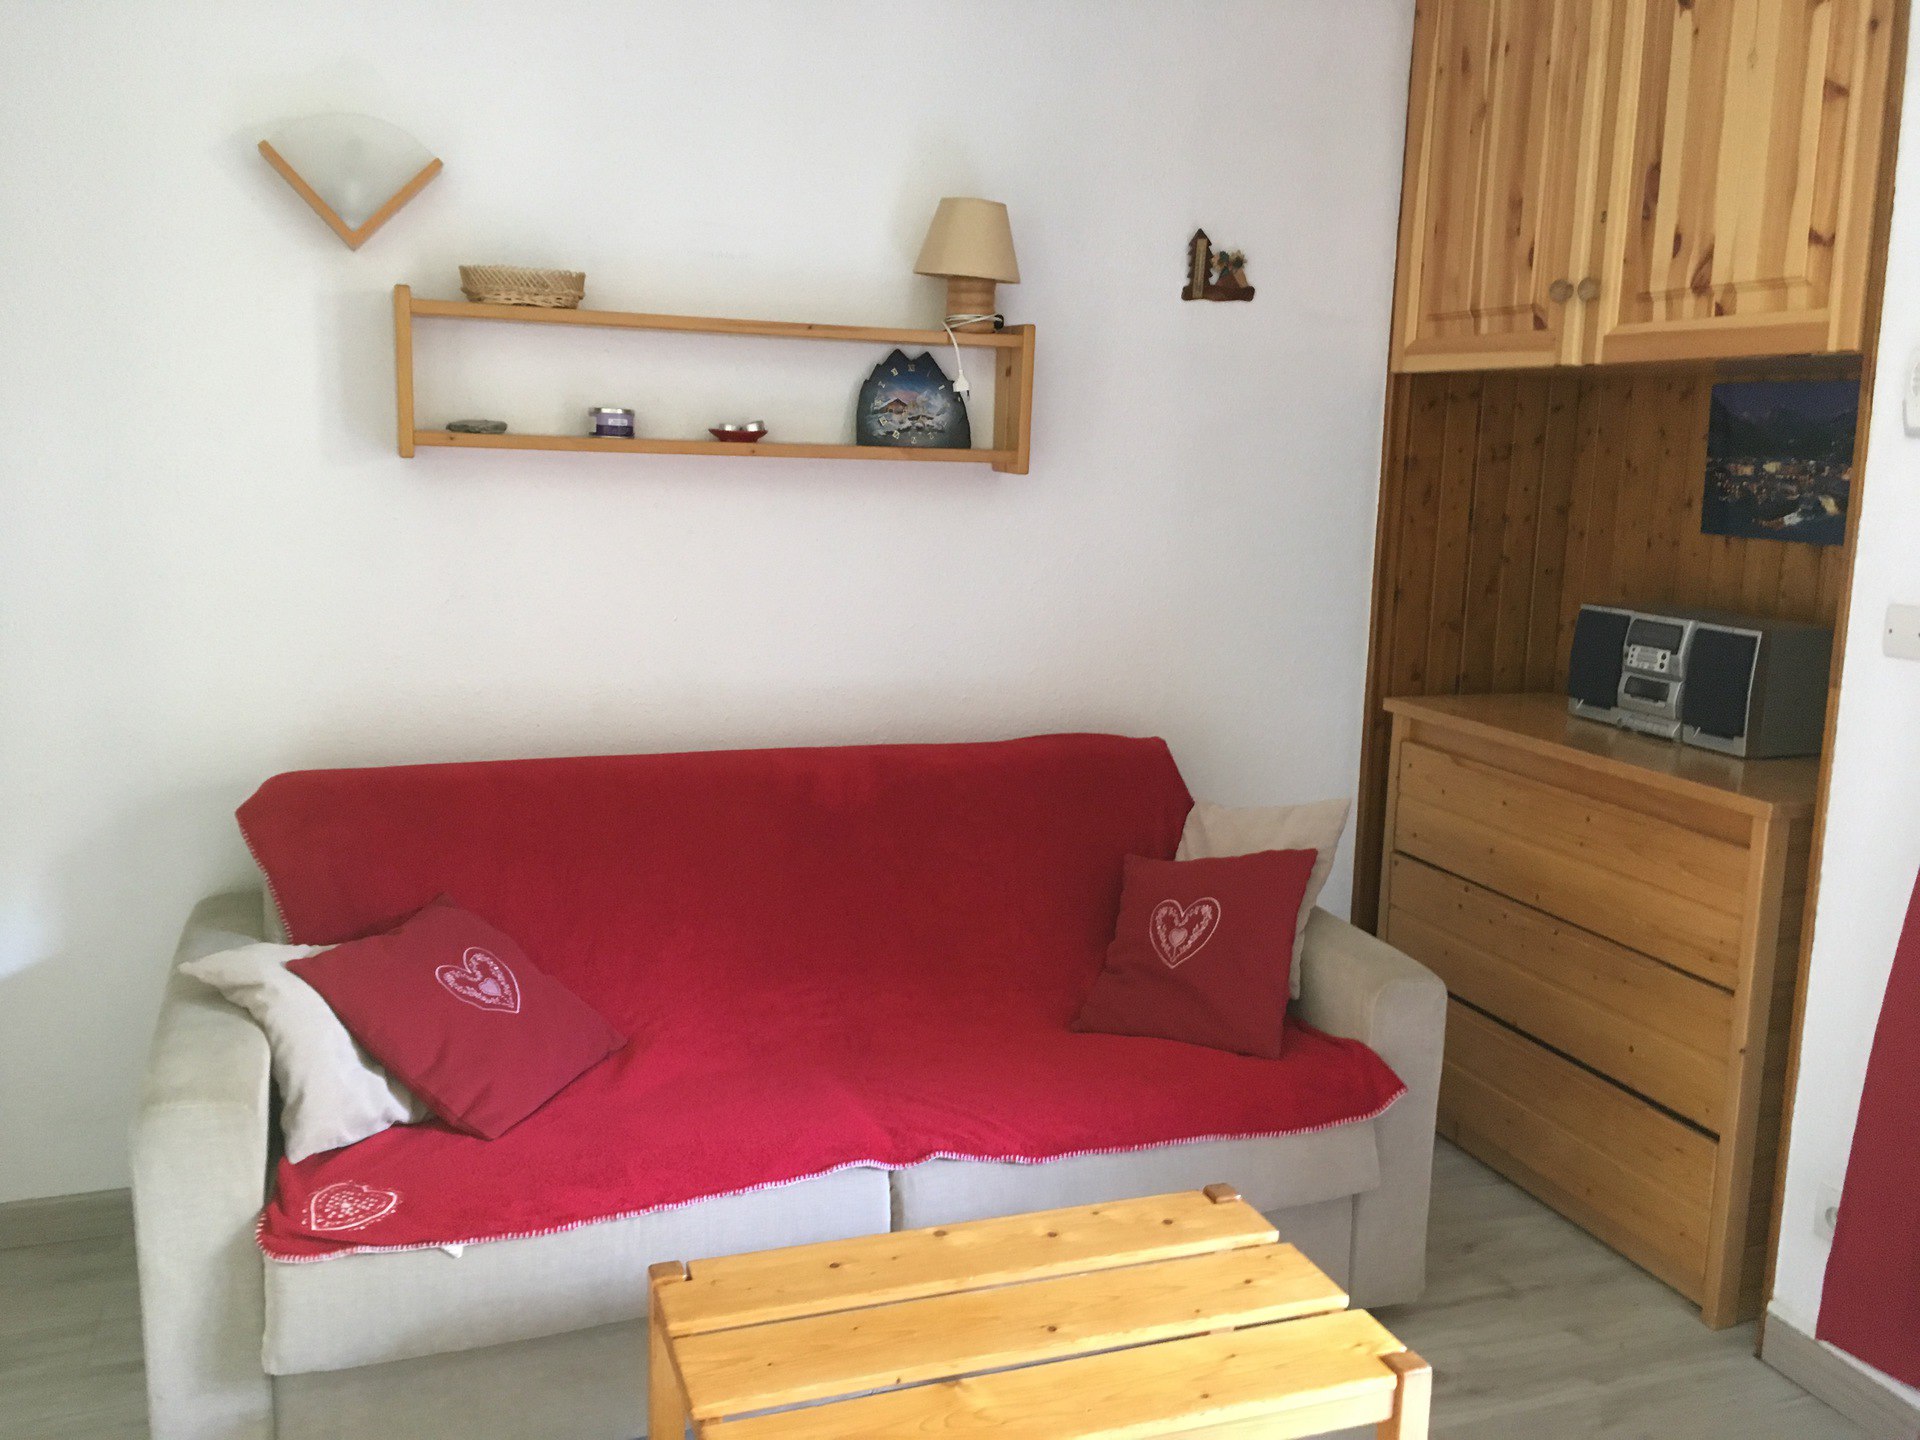 Studio 4 Persons Classic - Apartments Residence Vallee D'or - Valloire